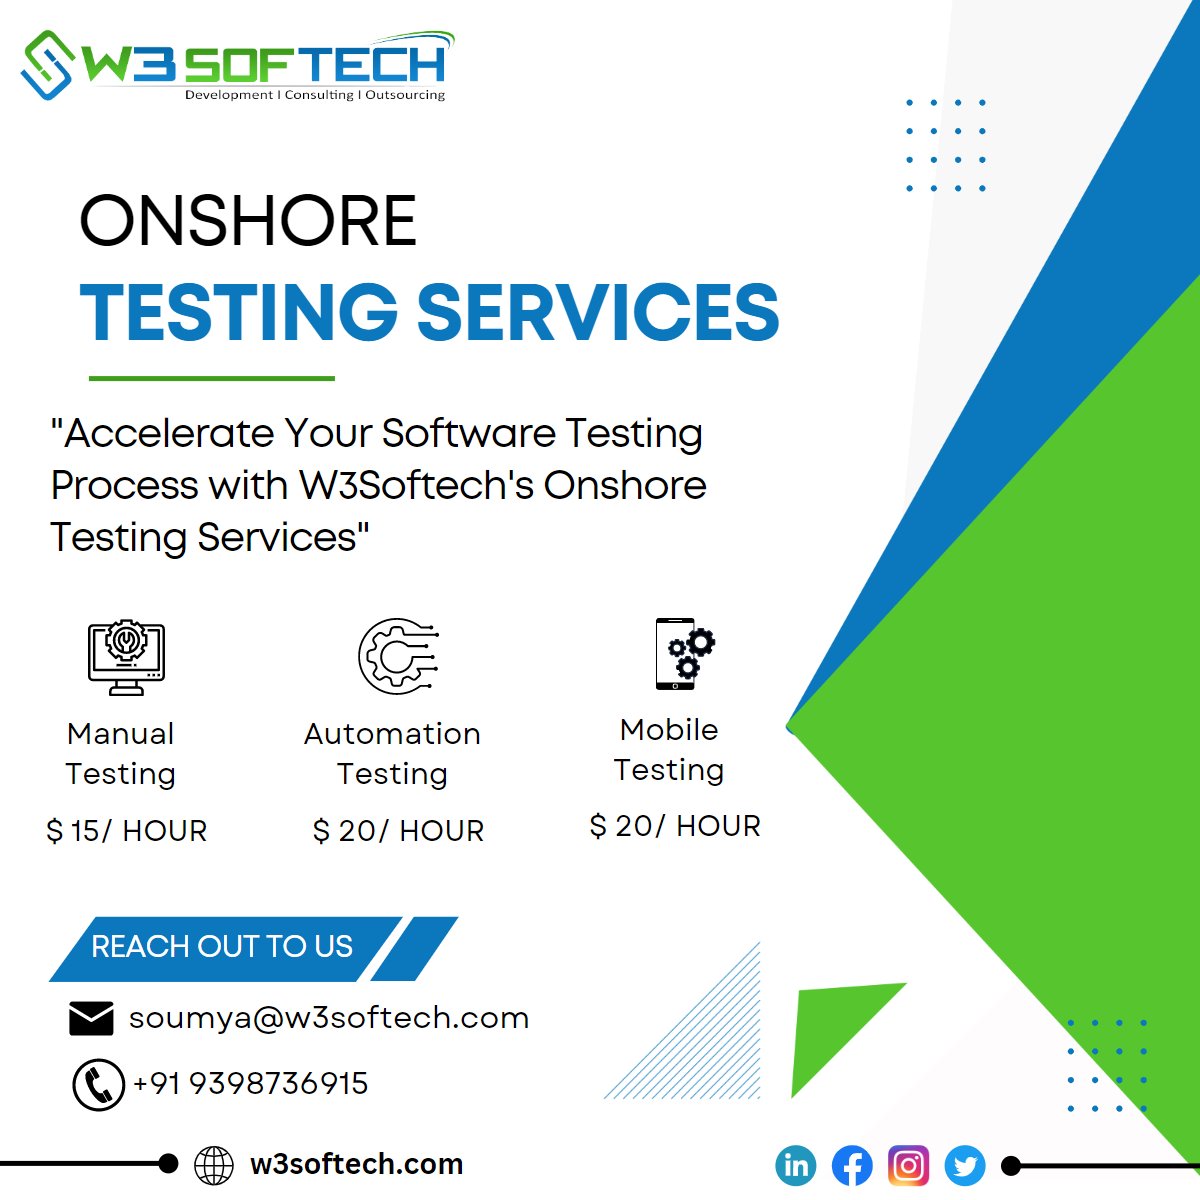 W3softech's onshore testing services provide a range of benefits, including increased efficiency, better communication, and reduced turnaround time. Contact us for more info: Email: soumya@w3softech.com Phone: +91 9398736915 #softwaretesting #onshore #affordable